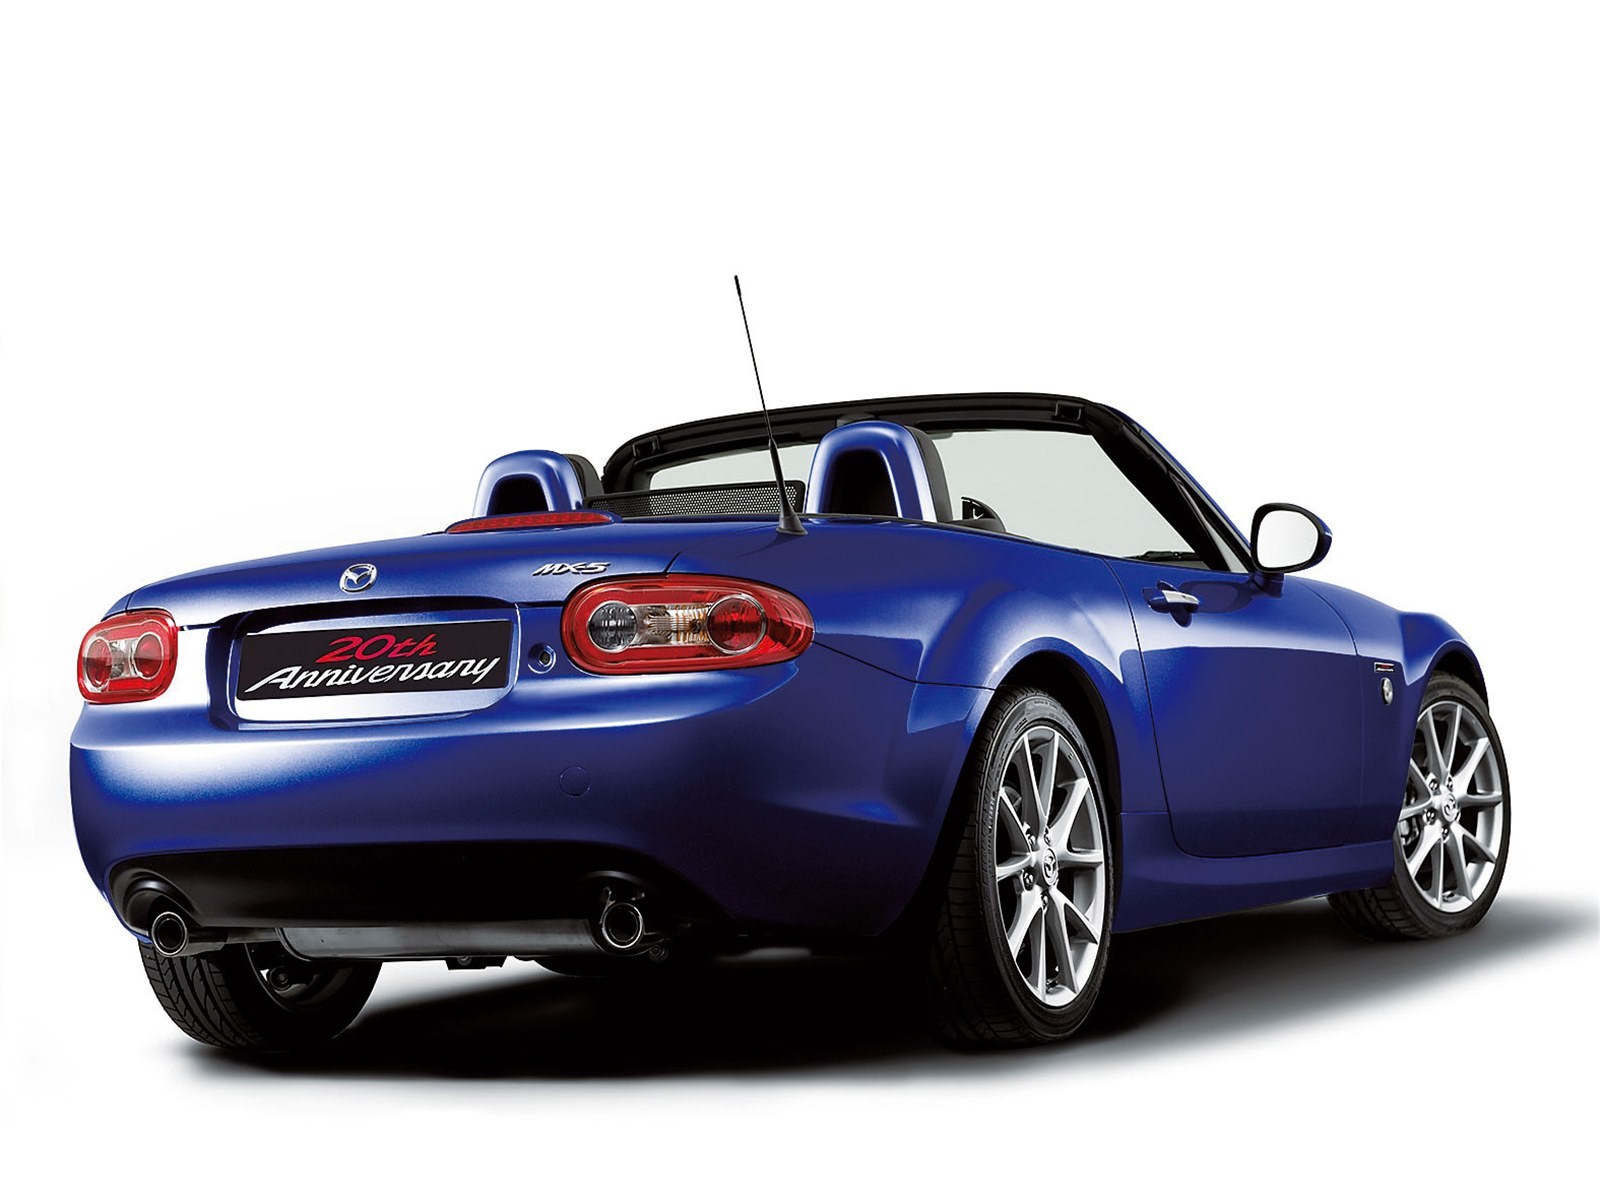 2015 Mazda MX-5 Widescreen Images - ColorCars